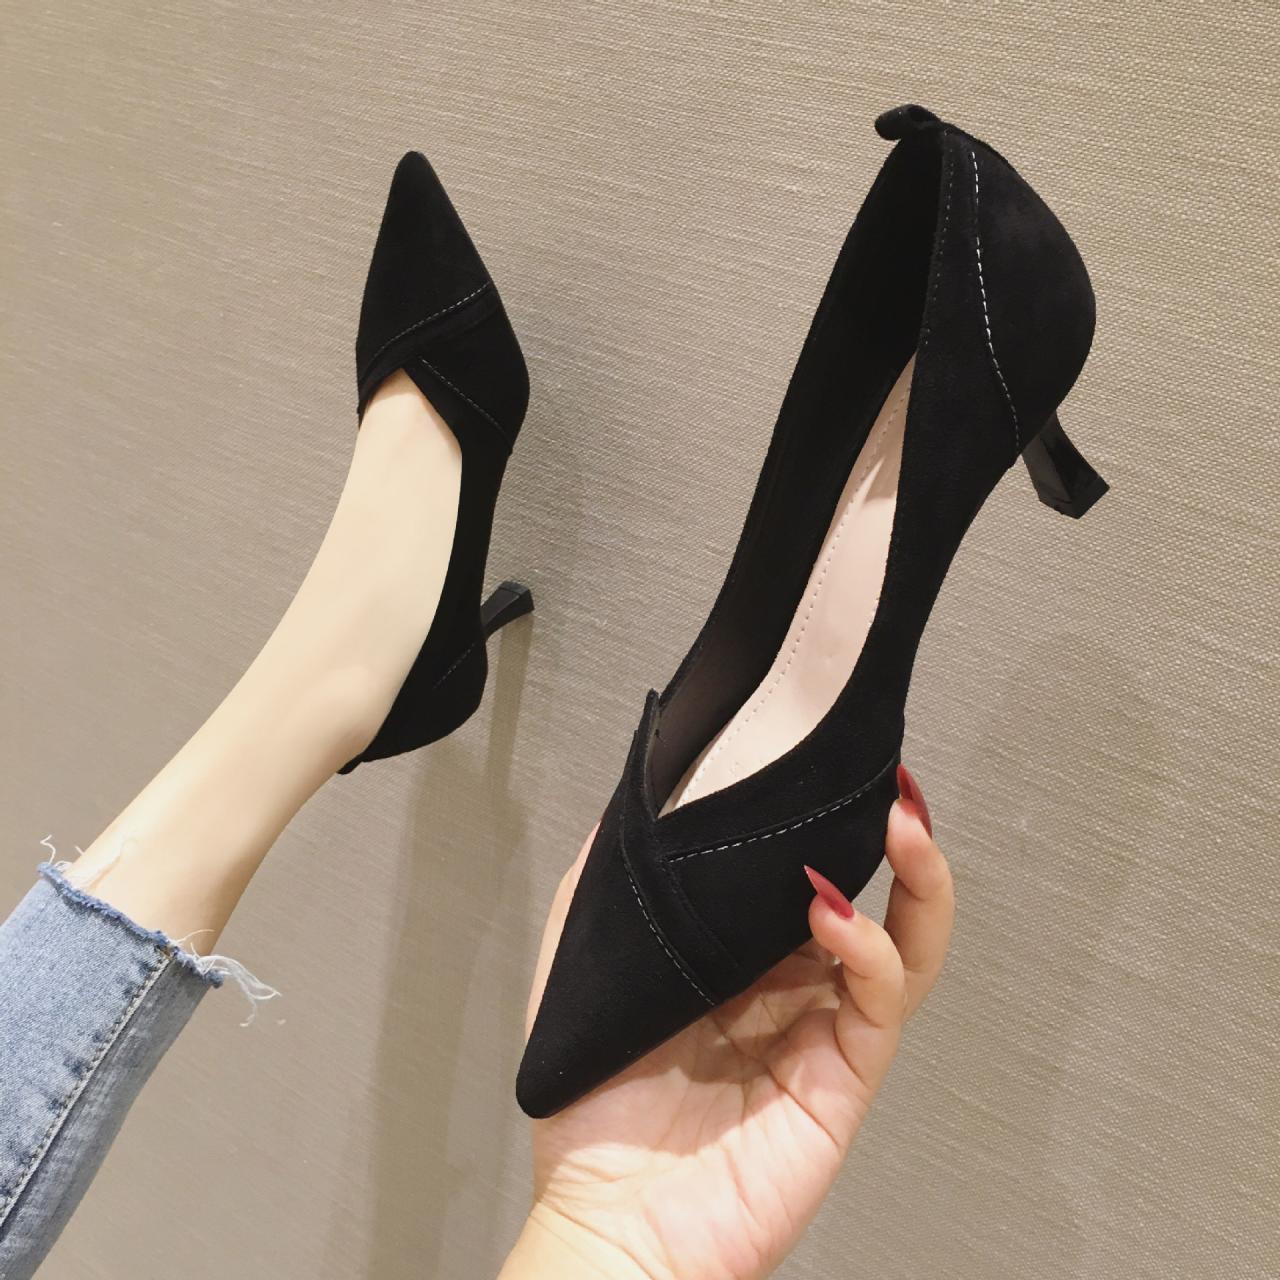 Women's High Heels Stiletto Pointed Toe Shallow Mouth Suede Girly Style Women's Shoes (heel 7.5cm) H311